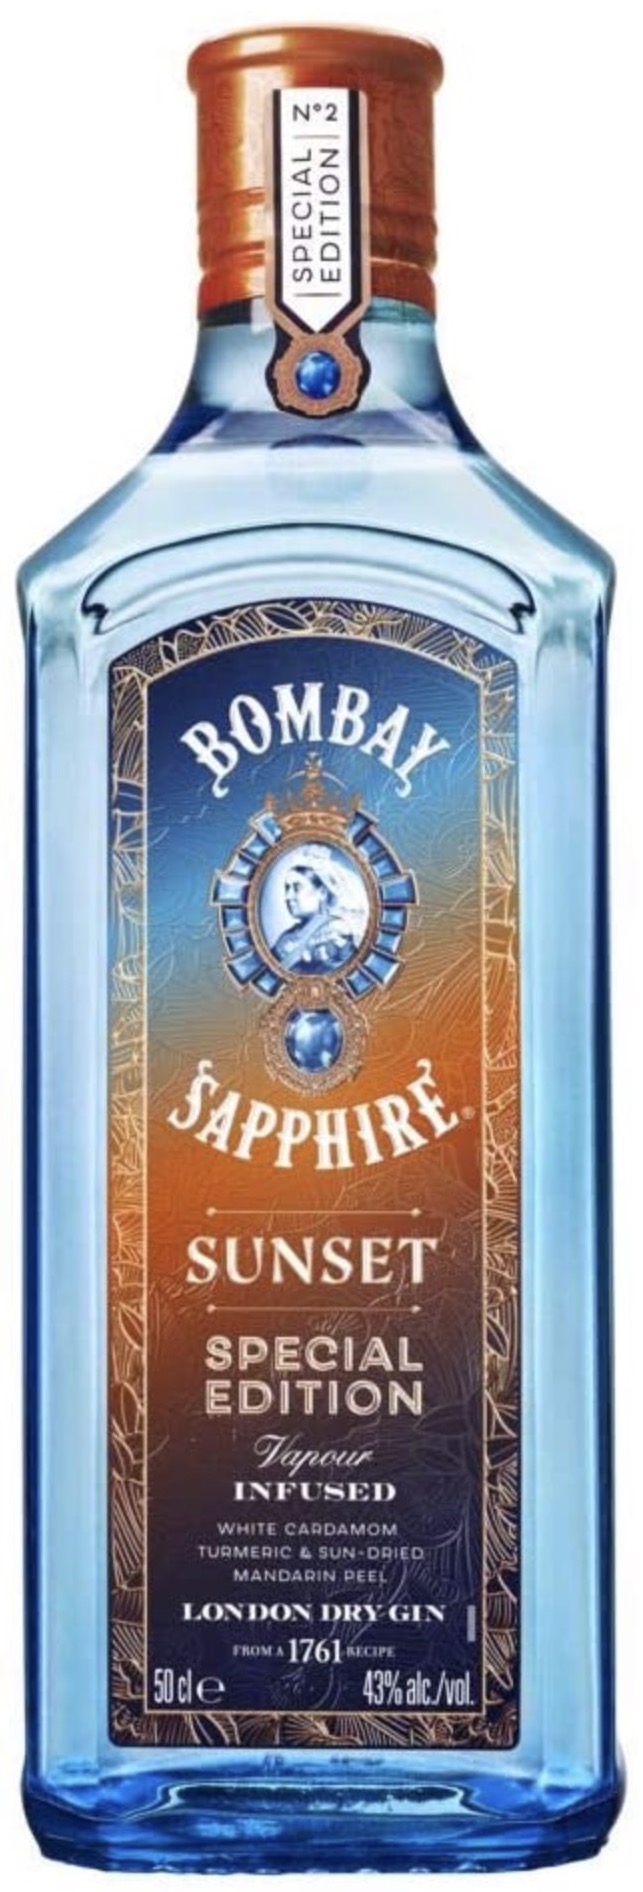 Bombay Sapphire Sunset Special Edition Gin 43% vol. 0,5L